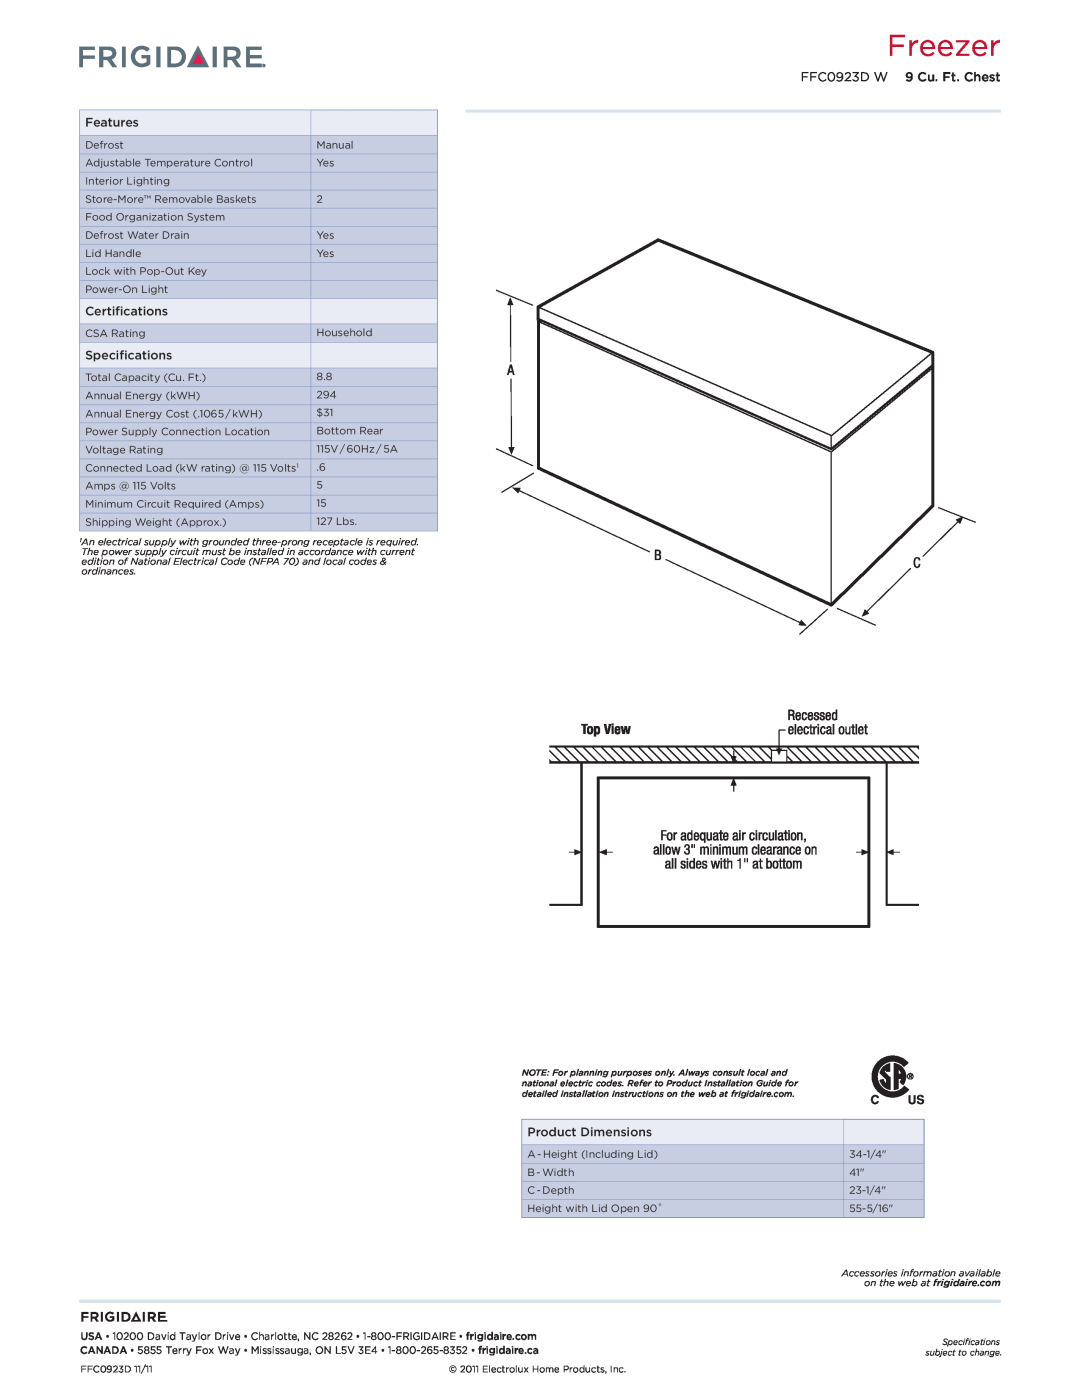 Frigidaire FFC0923D W dimensions Freezer, Features, Certifications, Specifications, Product Dimensions 